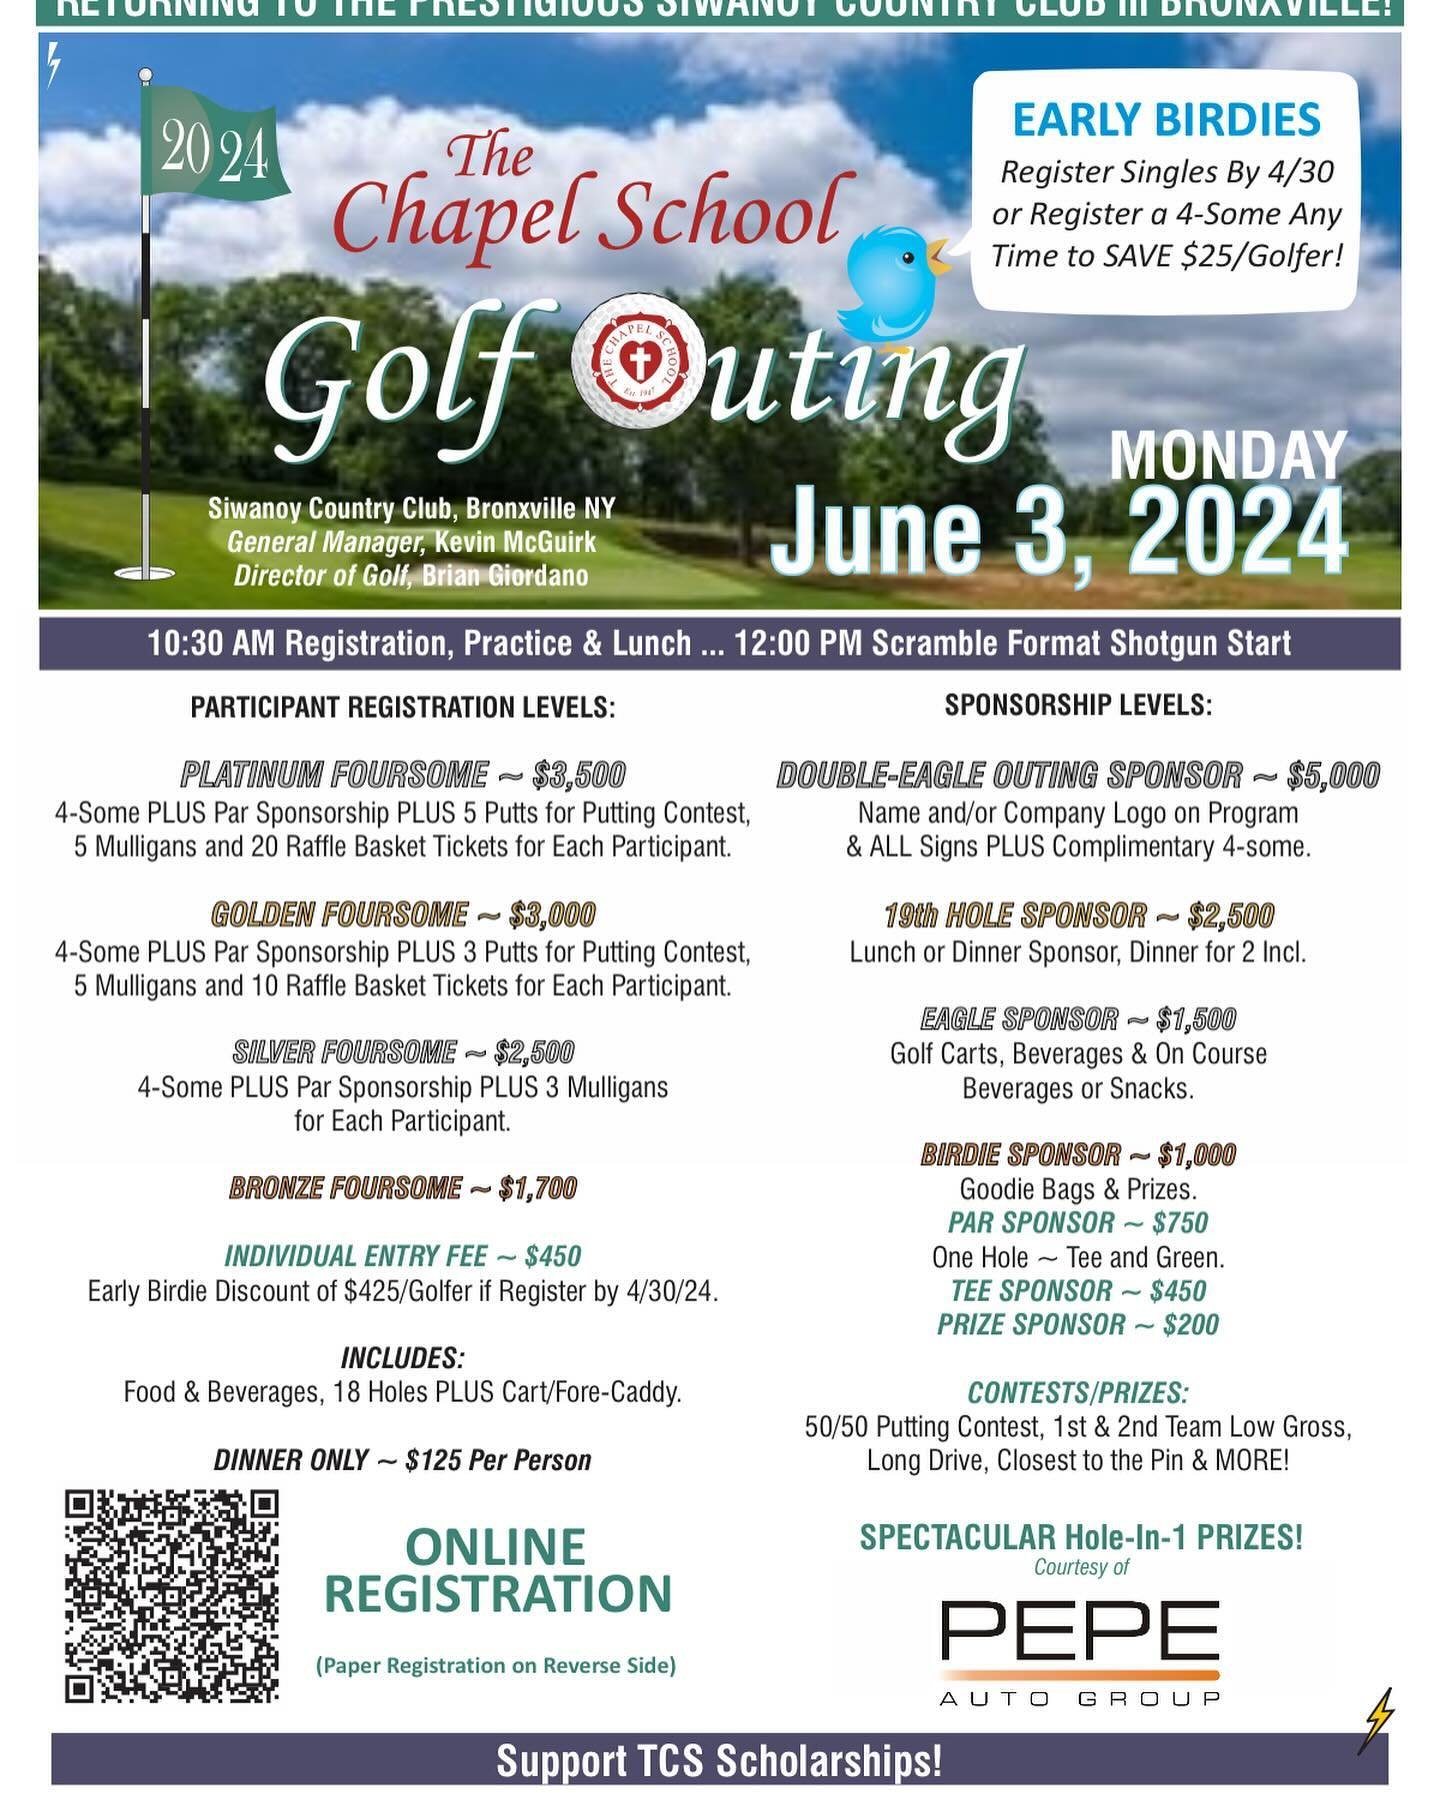 Looking for golfers and sponsors! Join Us ⛳️🎉!